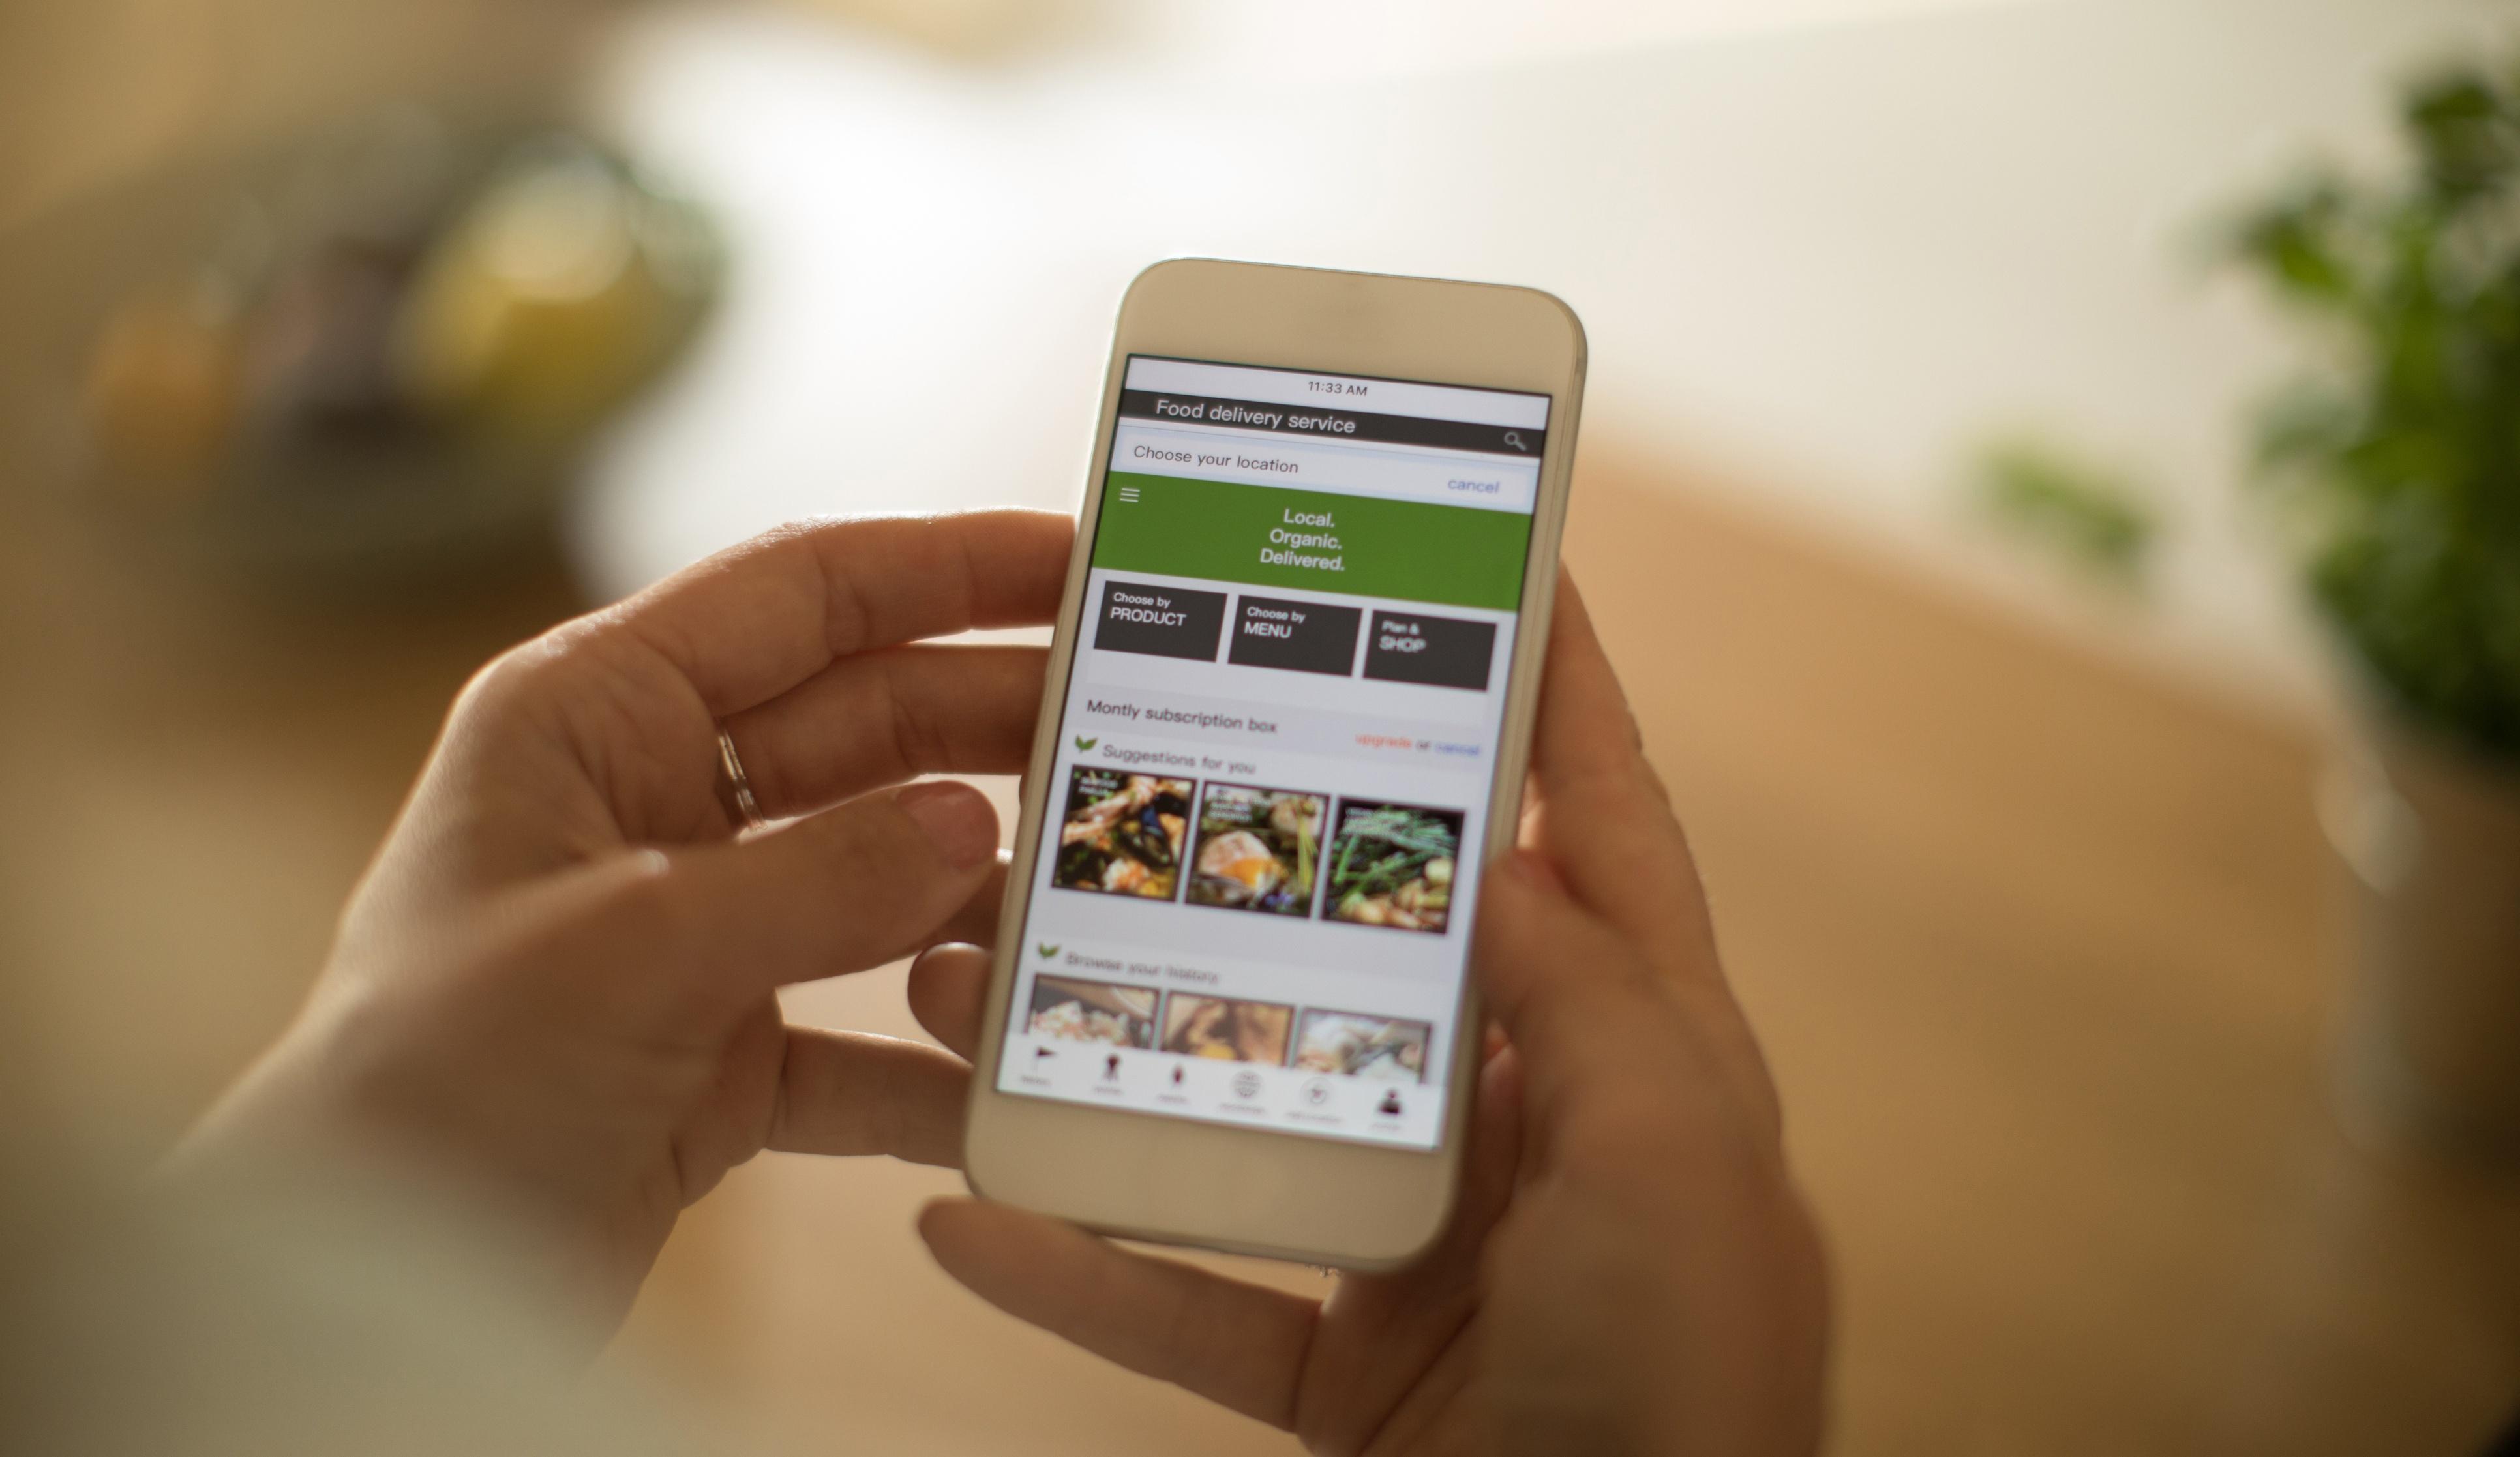 Ordering grocery delivery via smart phone